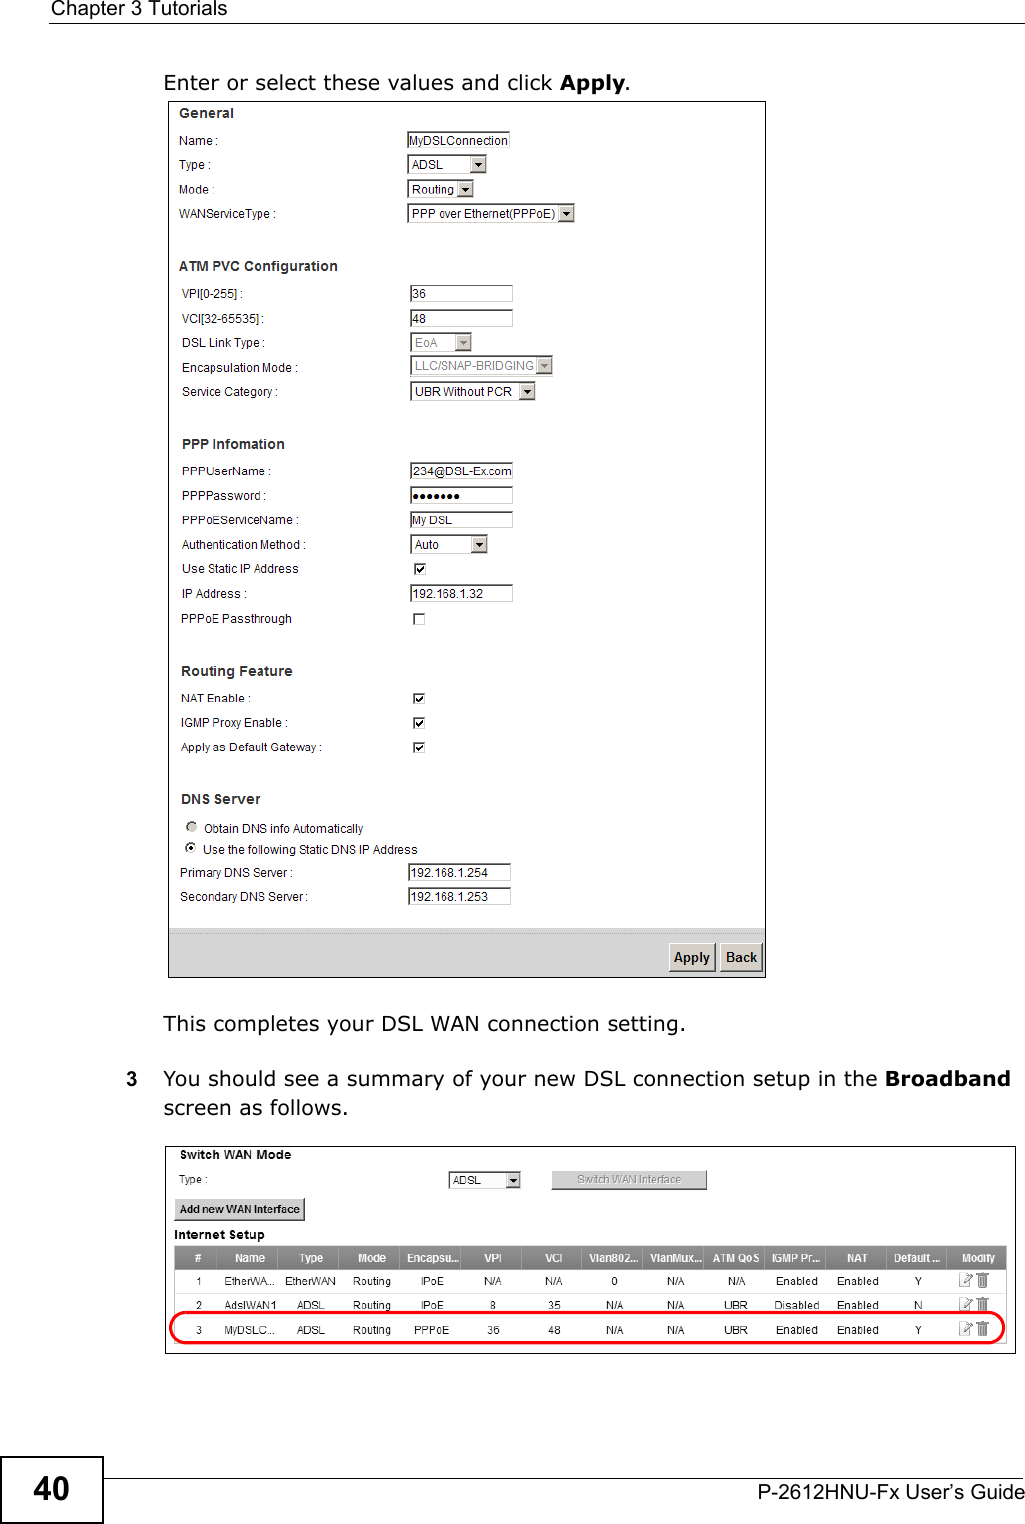 Chapter 3 TutorialsP-2612HNU-Fx User’s Guide40Enter or select these values and click Apply.This completes your DSL WAN connection setting.3You should see a summary of your new DSL connection setup in the Broadbandscreen as follows.